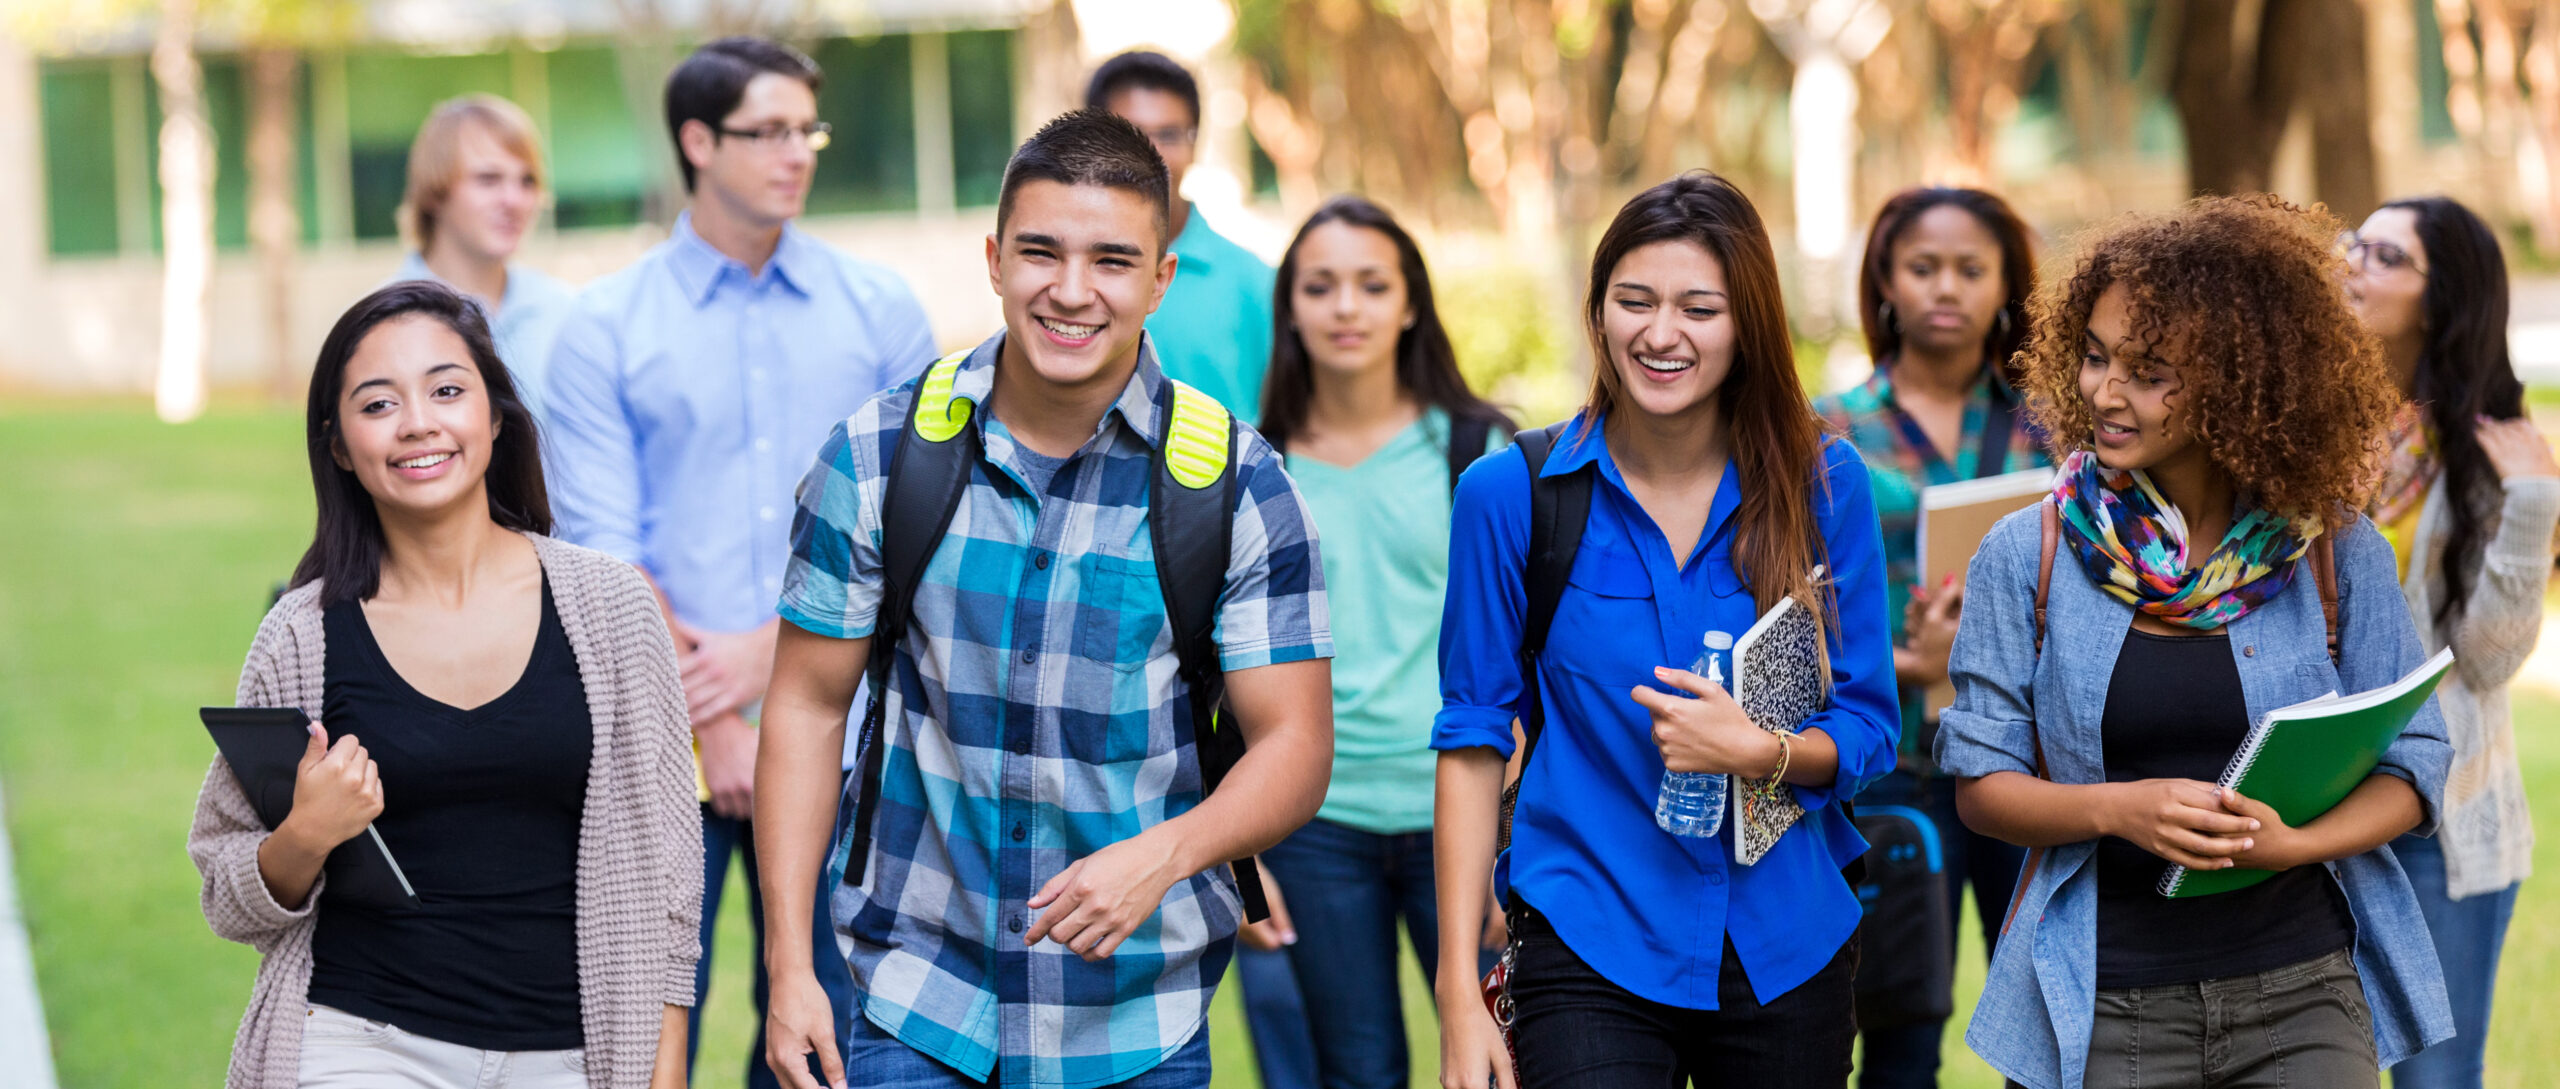 Diverse high school students walking on campus